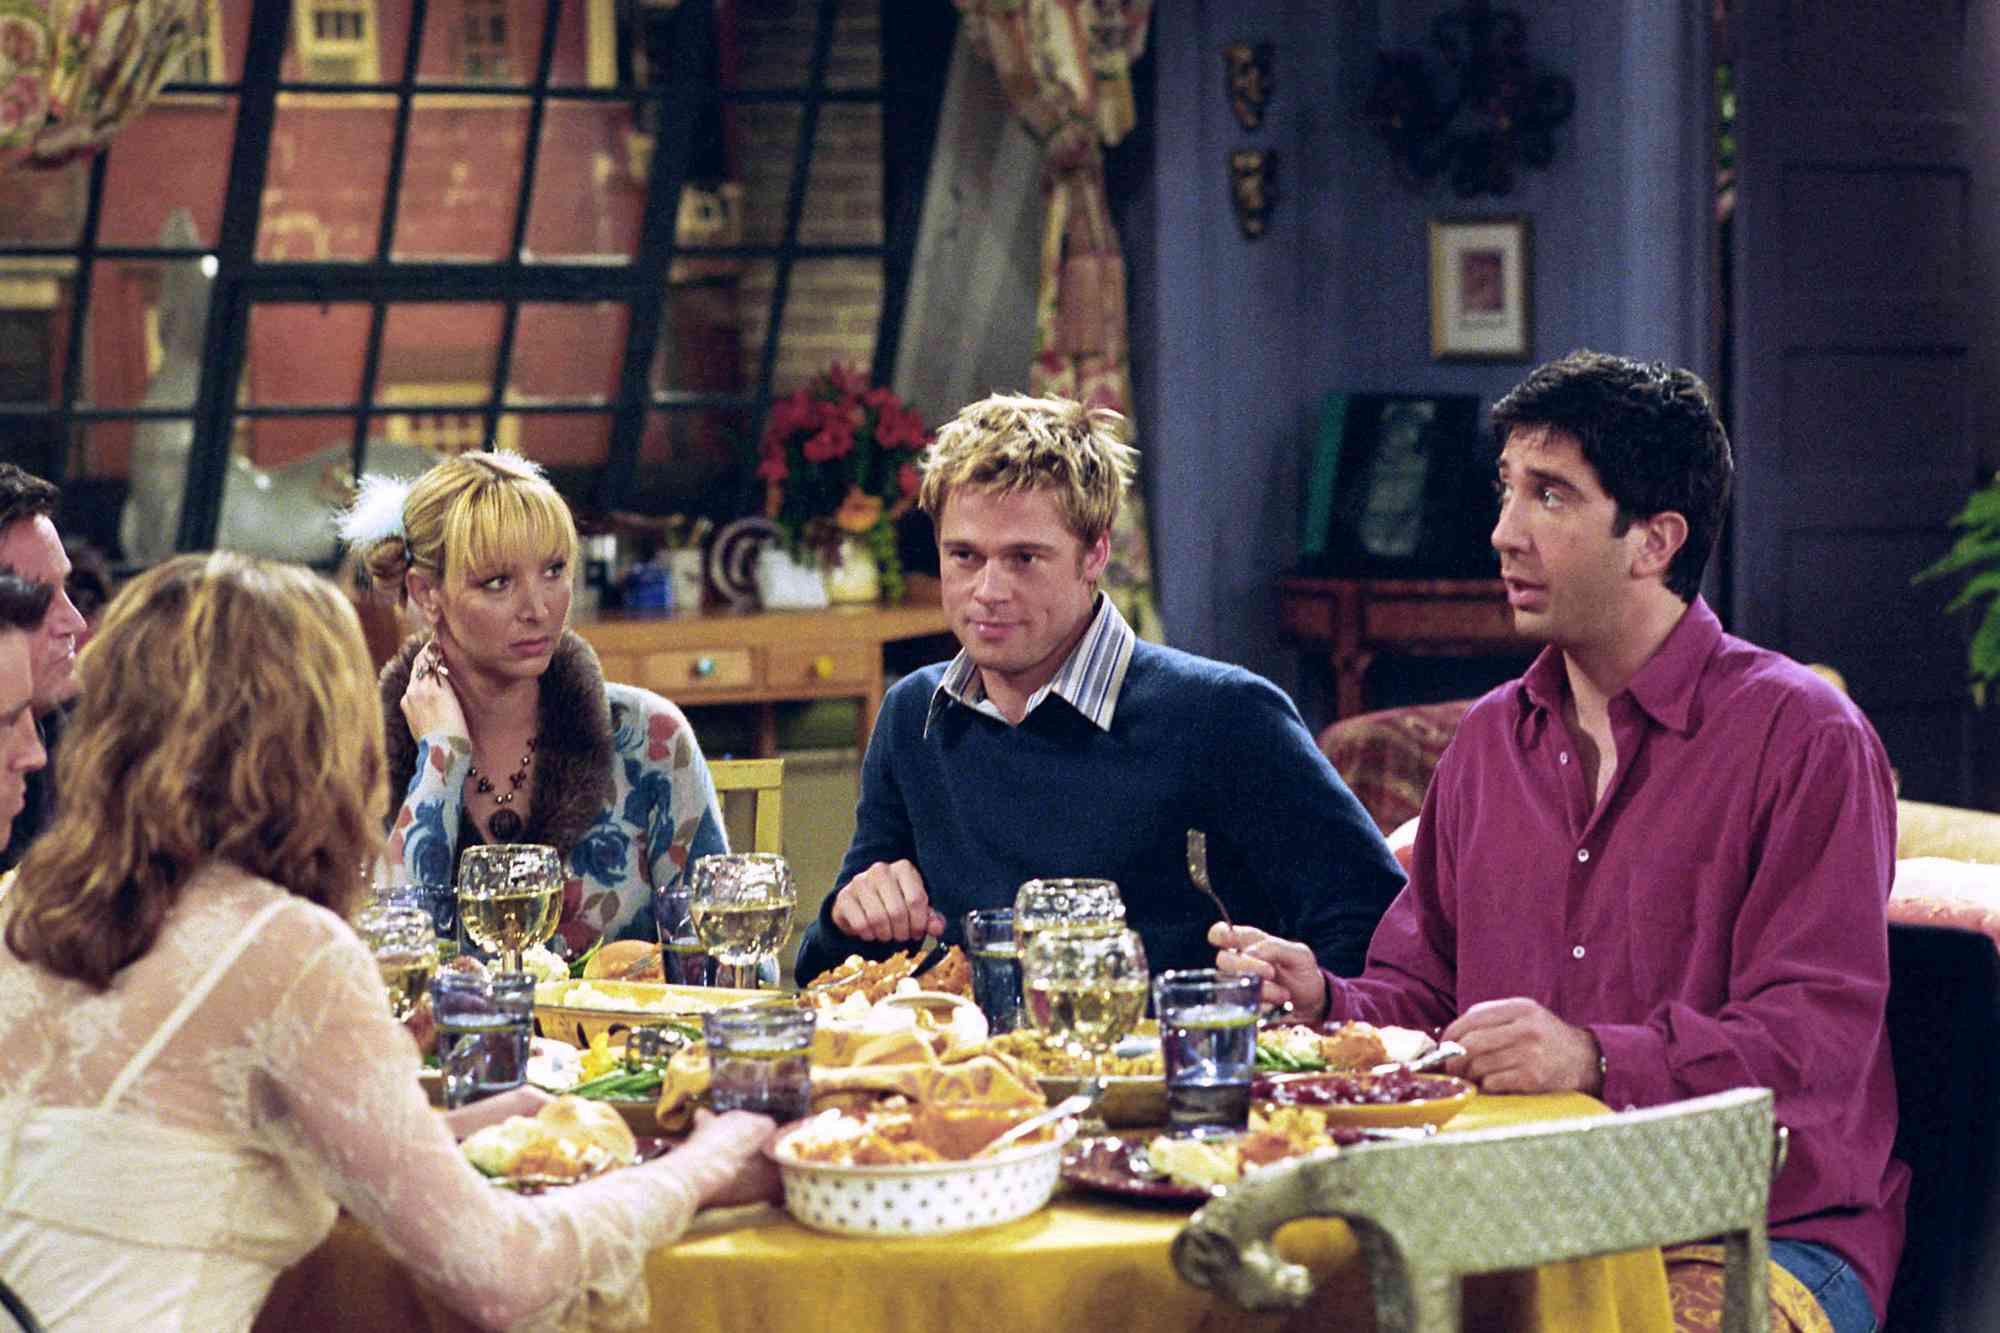 'Friends' -- "The One with the Rumor"-- Episode 9 -- Aired 11/22/2001 -- Pictured: (l-r) Jennifer Aniston as Rachel Green, Lisa Kudrow as Phoebe Buffay, Brad Pitt as Will Colbert, David Schwimmer as Ross Geller -- Photo by : Danny Feld/NBCU Photo Bank